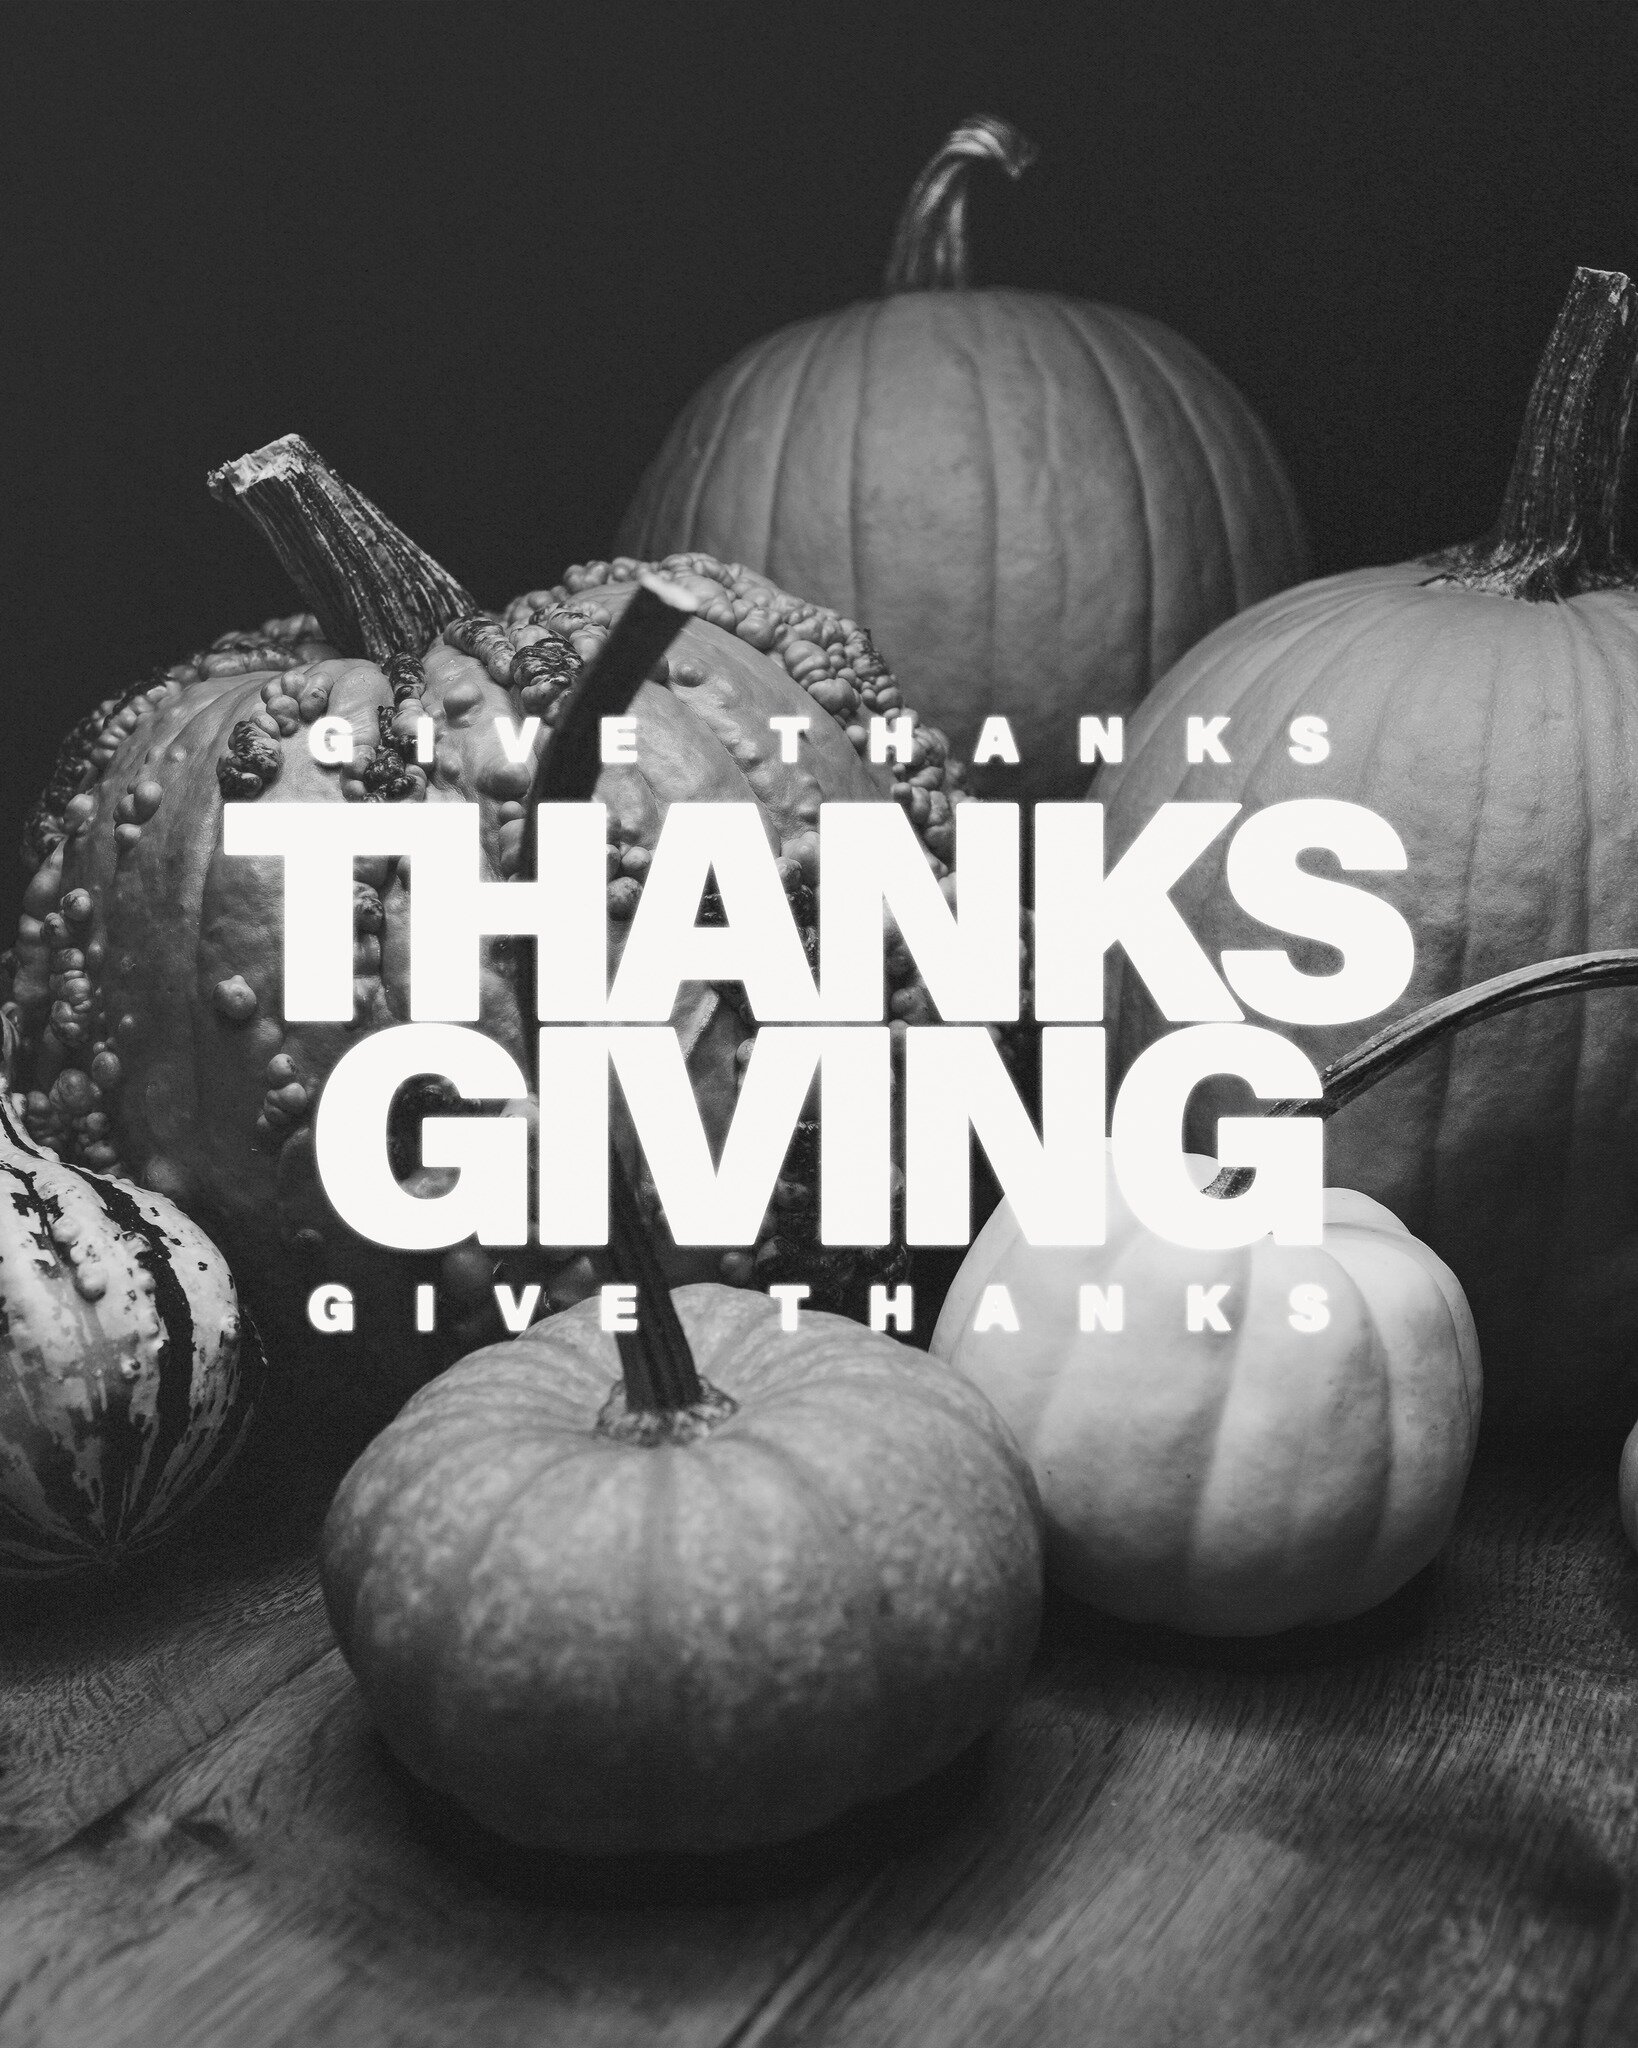 Here at Trellis we have a lot to be thankful for. We are thankful for our students who have said &quot;yes&quot; to the call God has placed on their lives into local-church ministry. We are thankful for our Hub Church leaders who are prioritizing rai